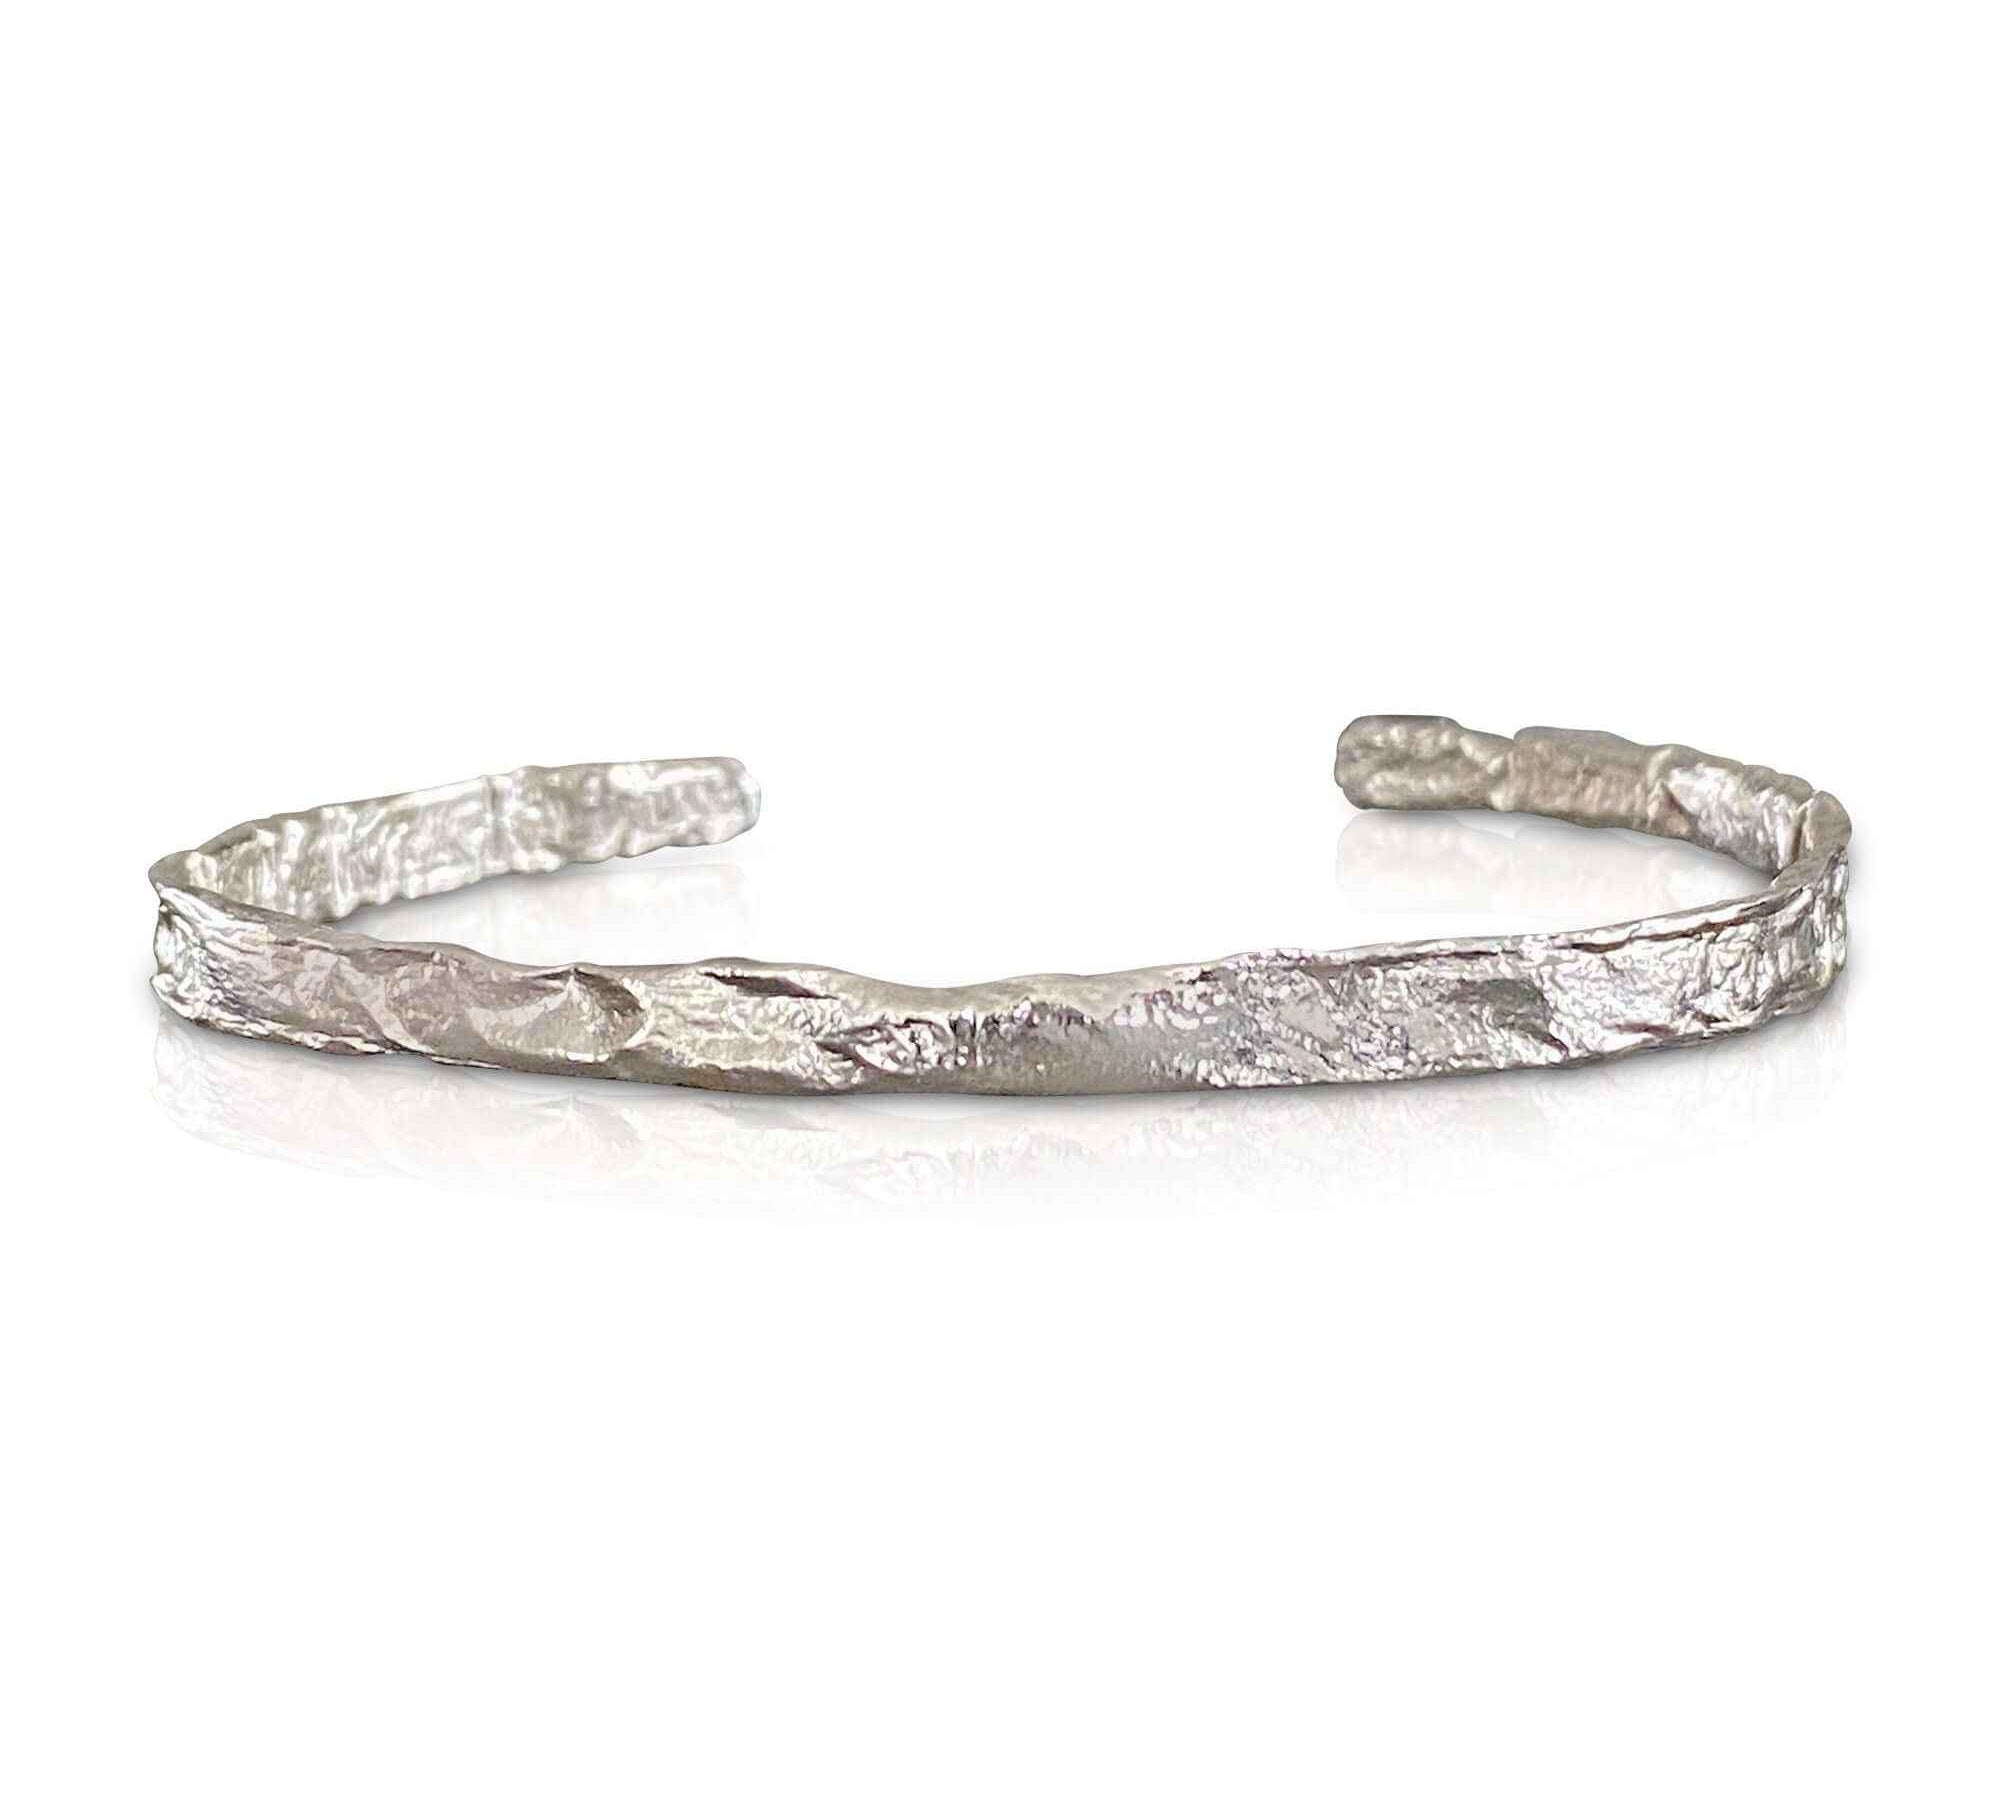 Chic women's Silver Foil Textured Bangle by Alessandra James.